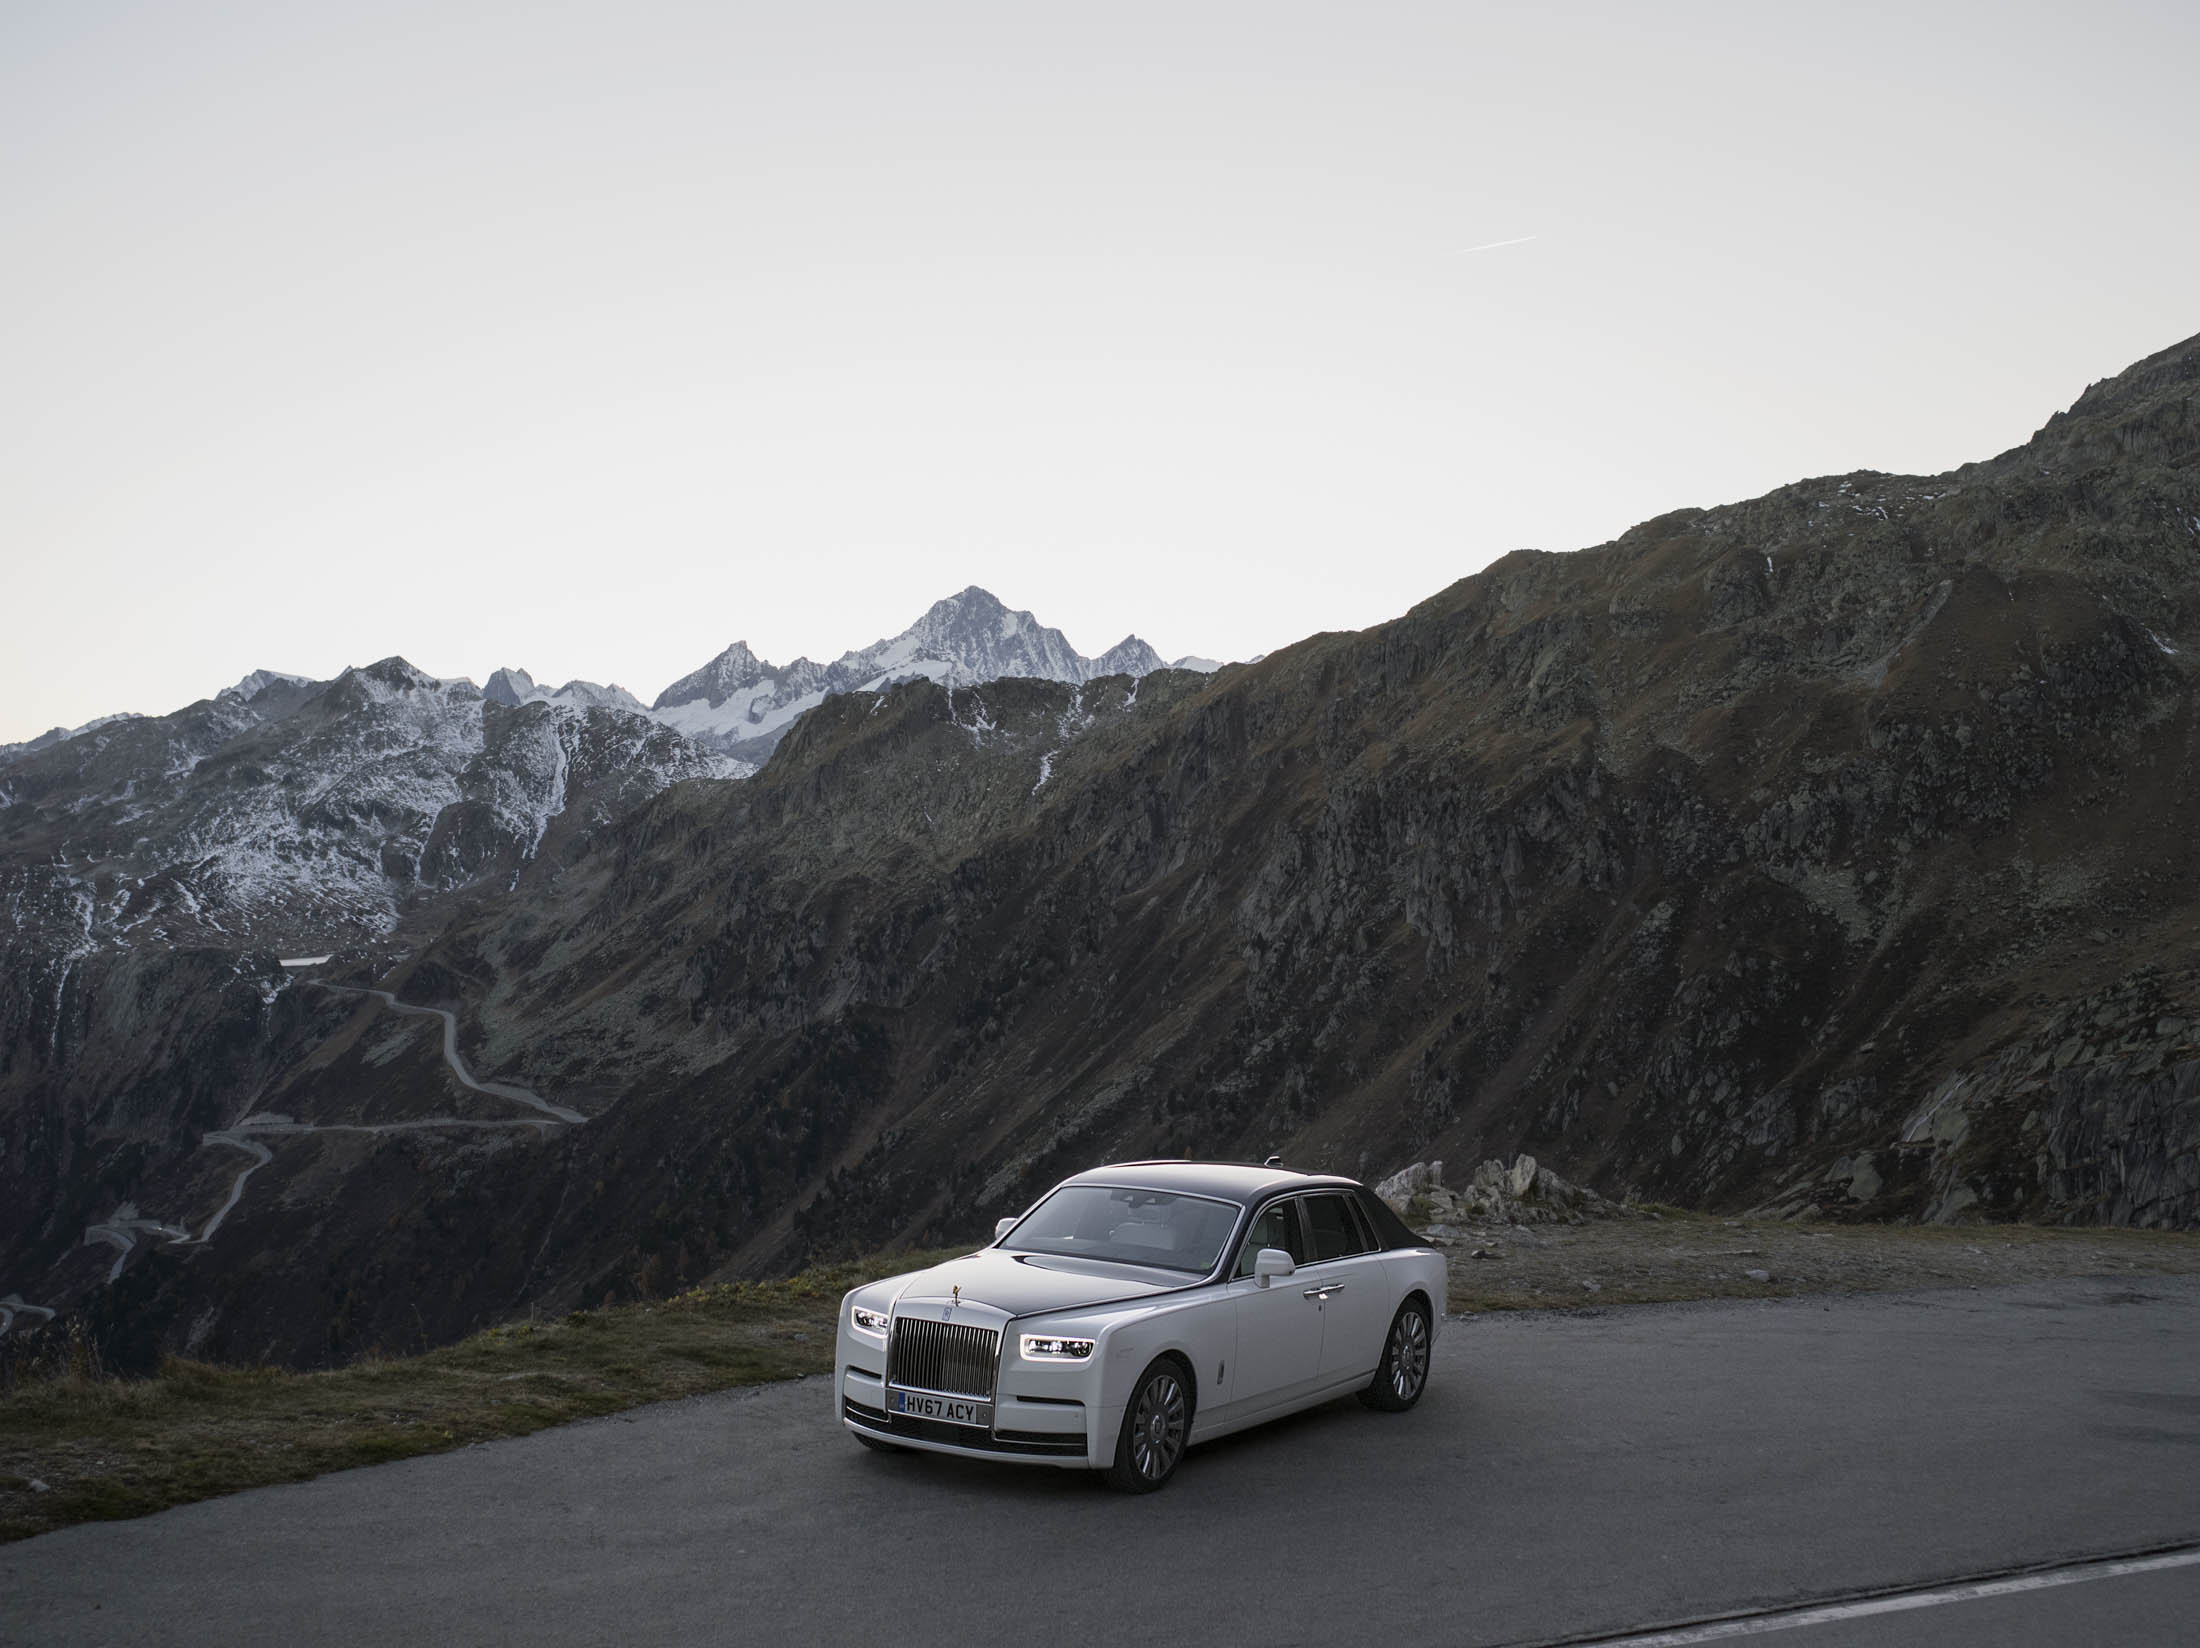 Rolls-Royce Phantom Review: The End of the Era of Opulence - Bloomberg